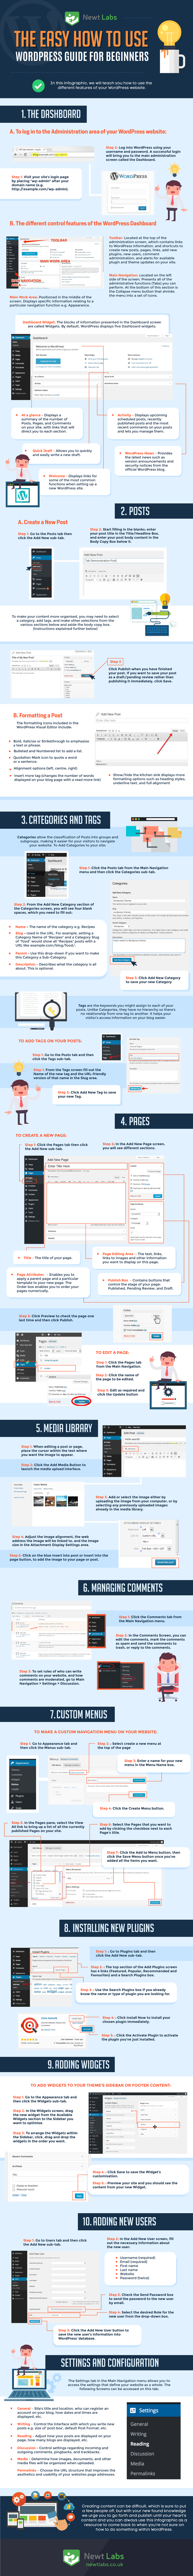 The Easy How To Use WordPress Guide For Beginners - #Infographic